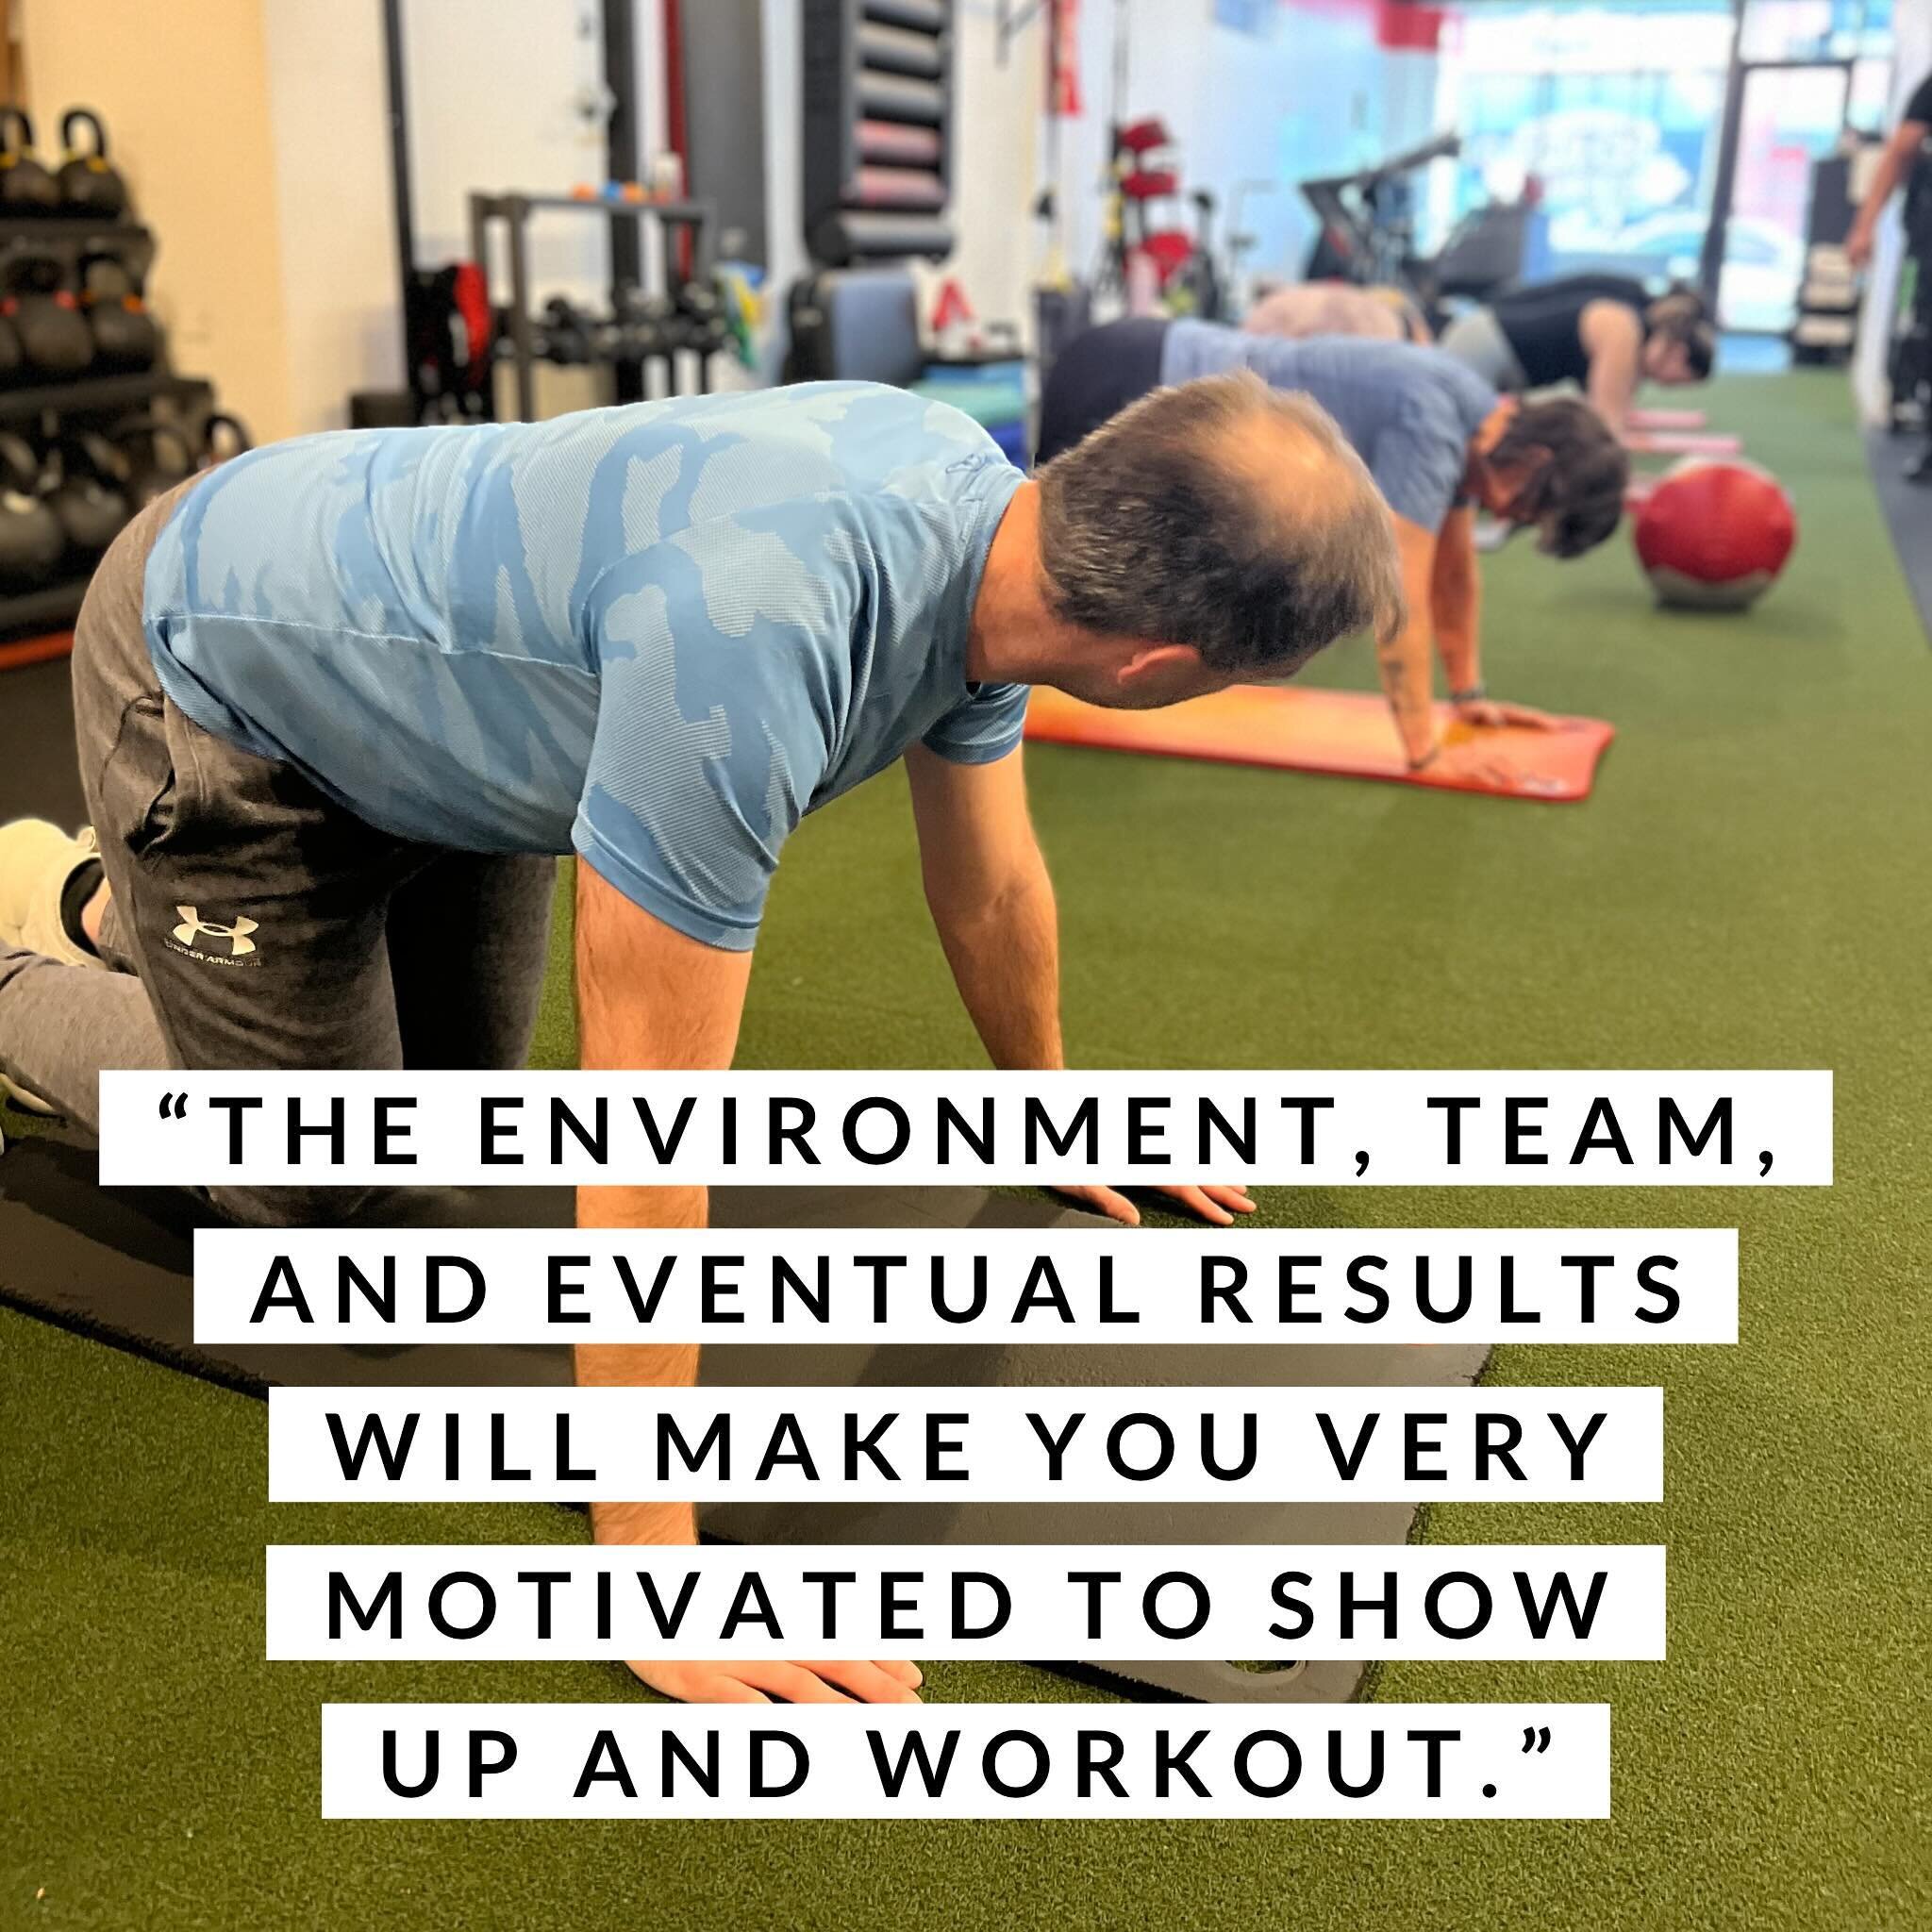 We work hard to keep you coming back because we want you to succeed! Our community of trainers and clients put in a lot of hard work and we have fun while we&rsquo;re doing it. Join us for a free trial and see what we&rsquo;re all about! 
.
#stronger